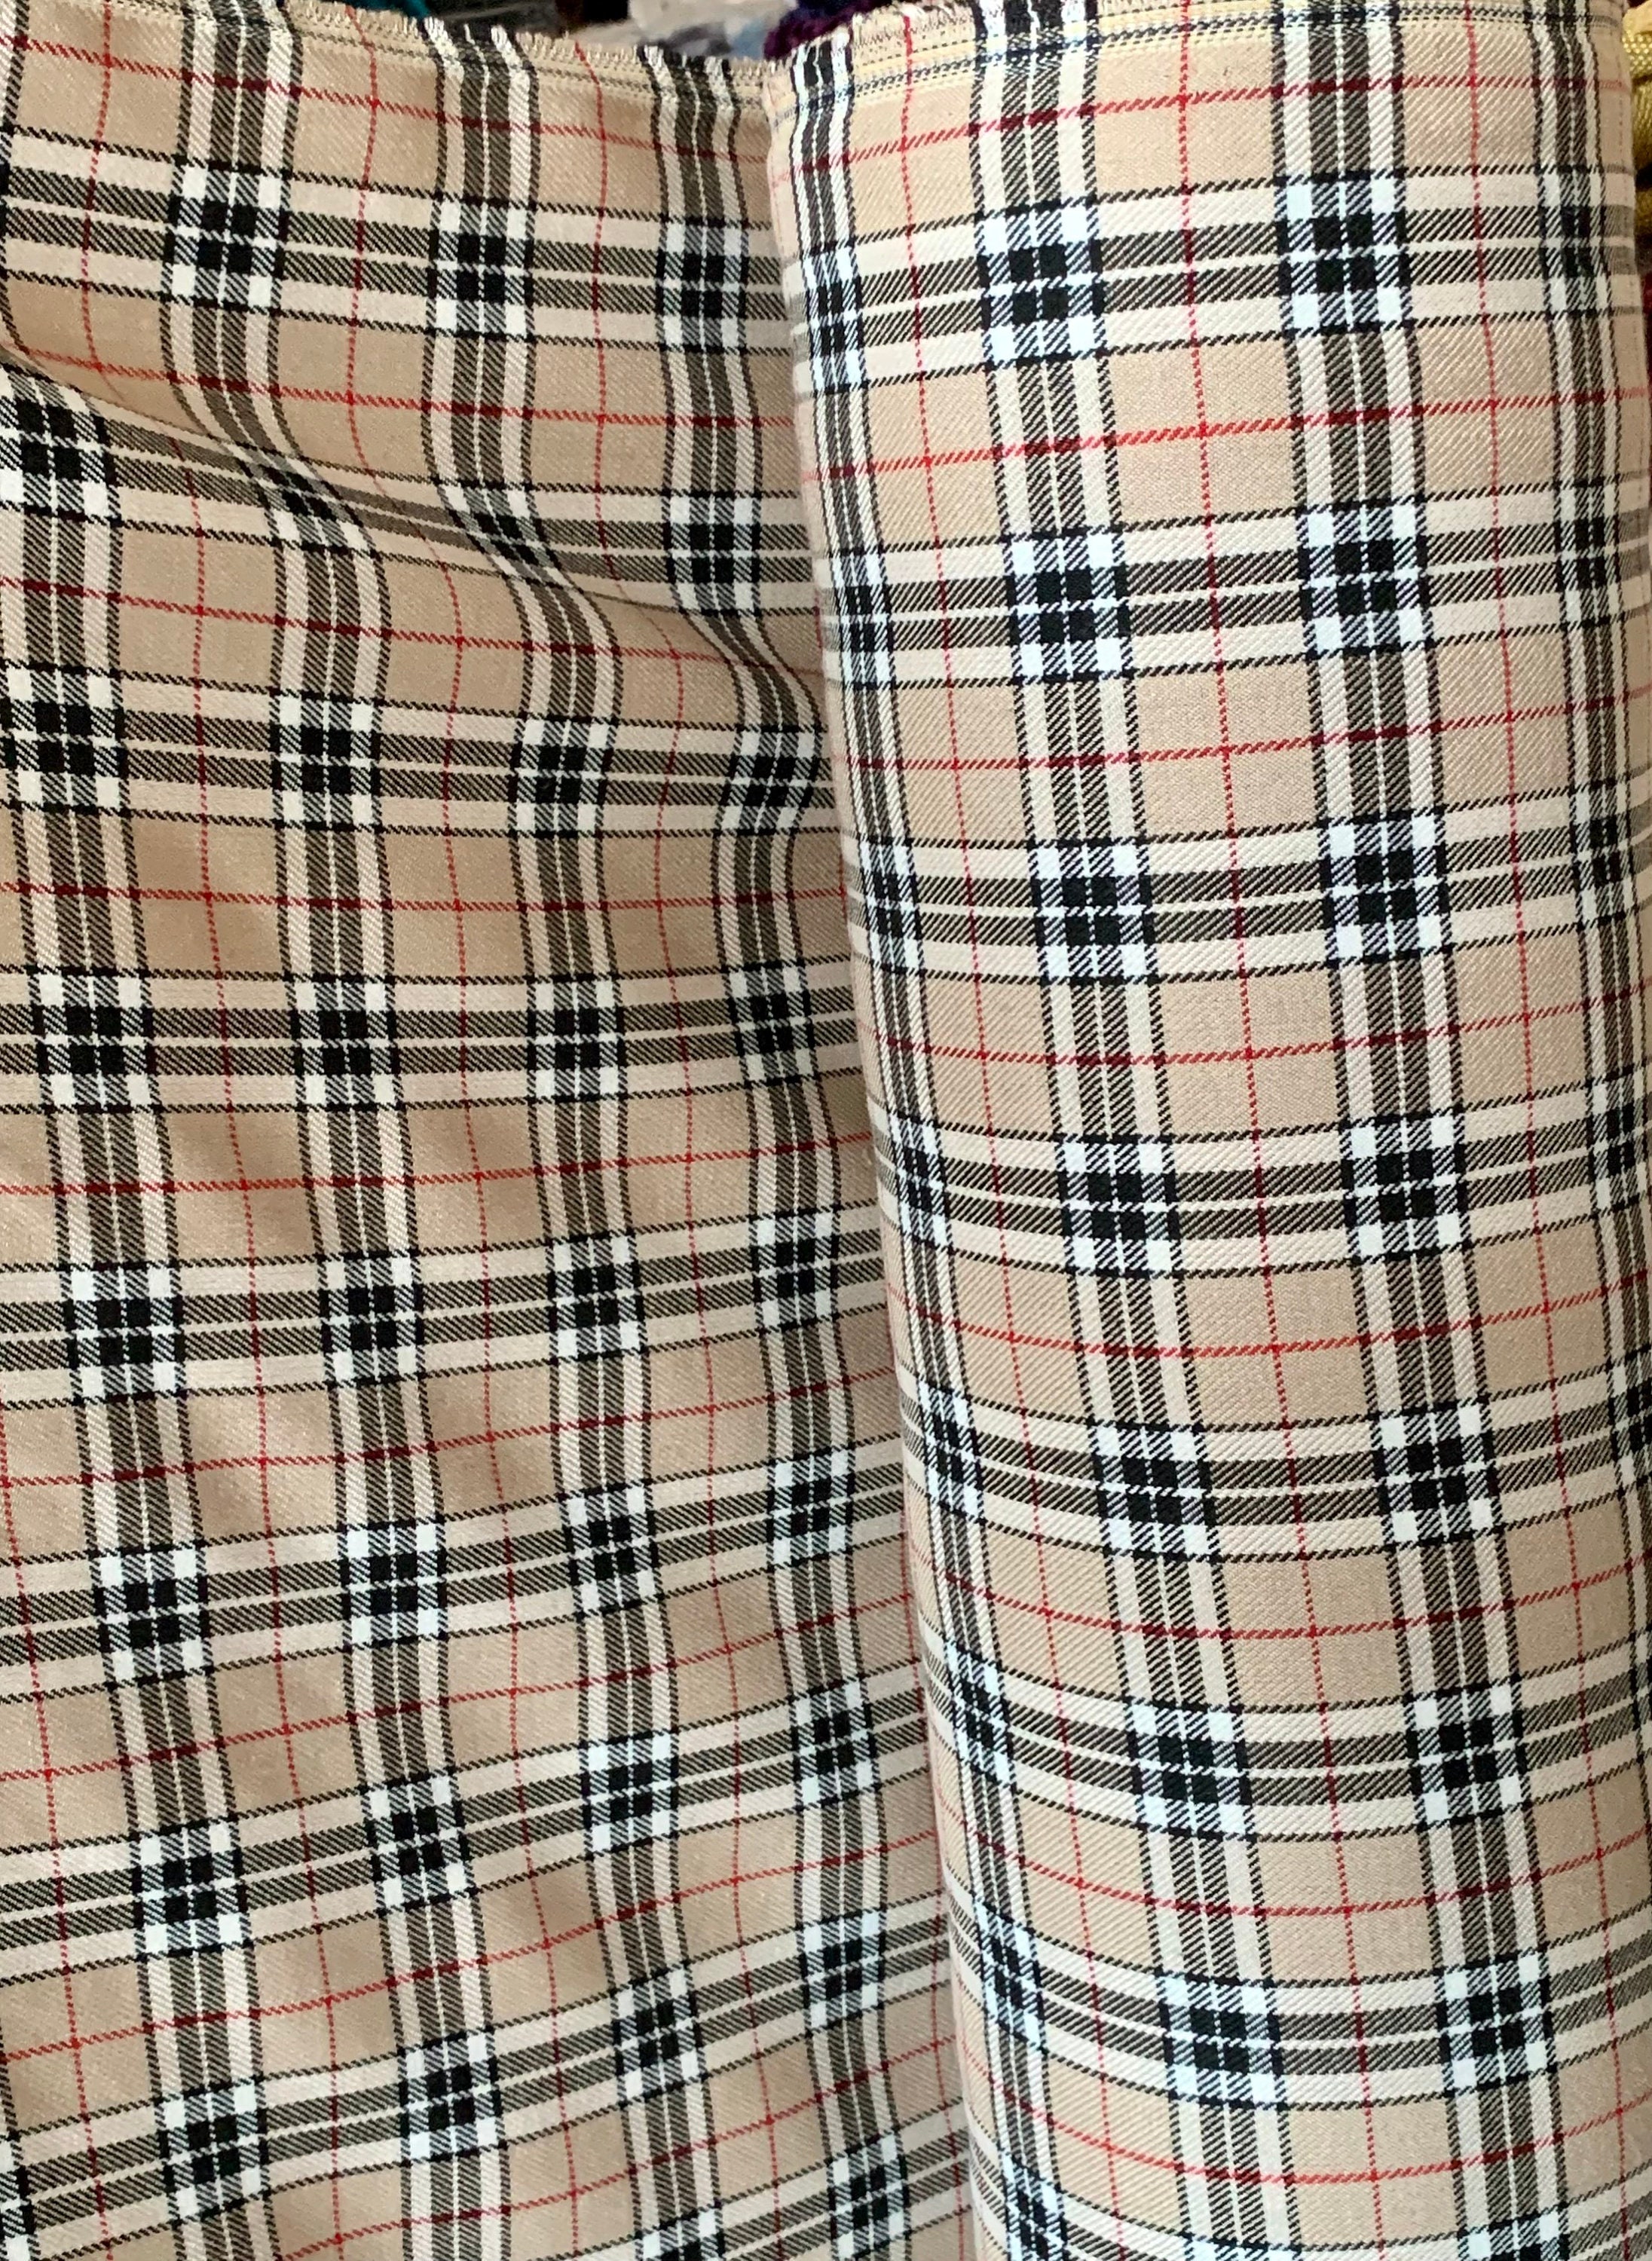 Burberry beige Poly viscose tartan check plaid suiting fabric | Etsy